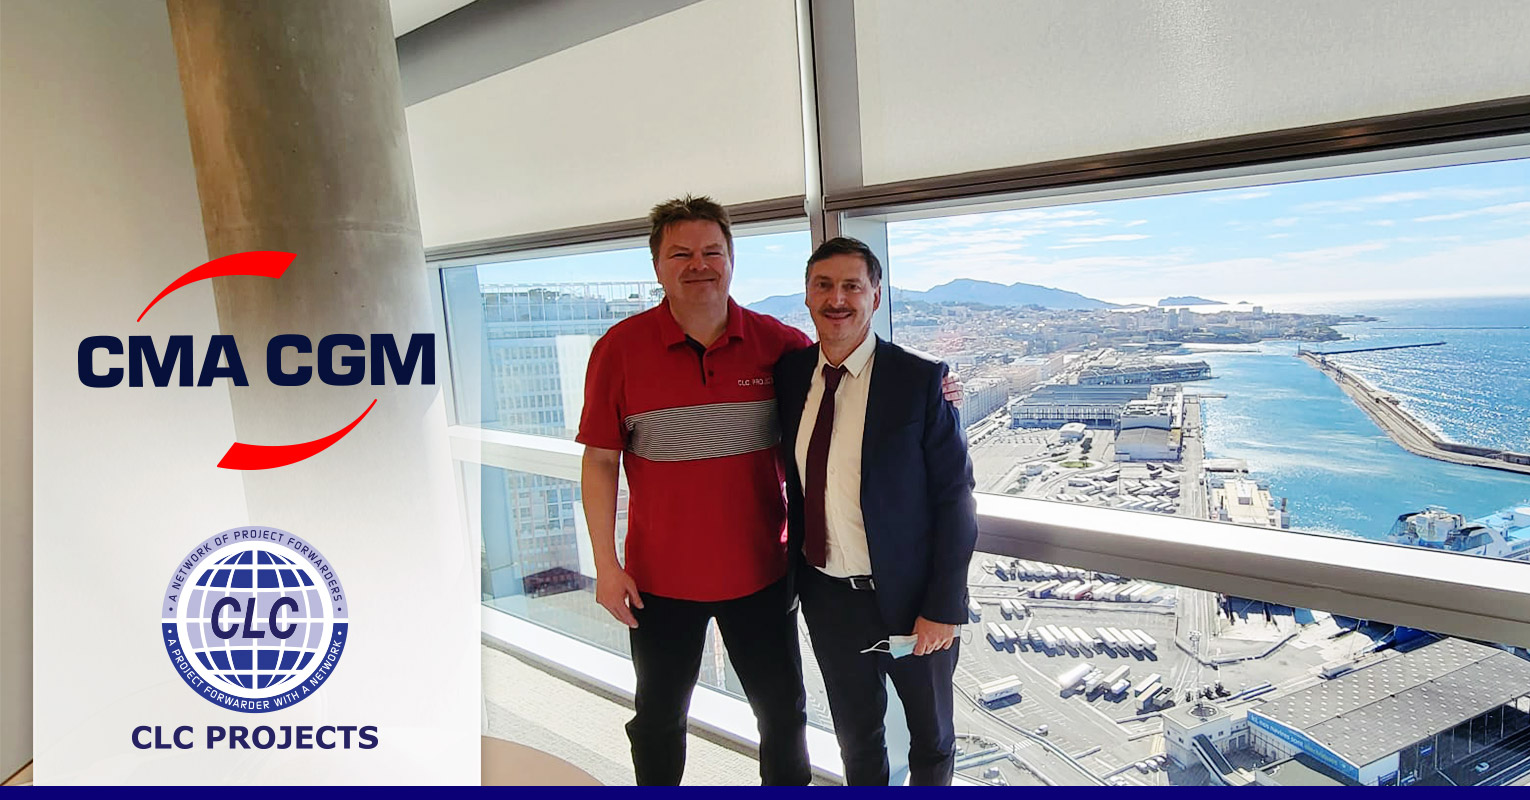 CLC Projects met with Stephane Berninet of CMA CGM at their head office in Marseille, France